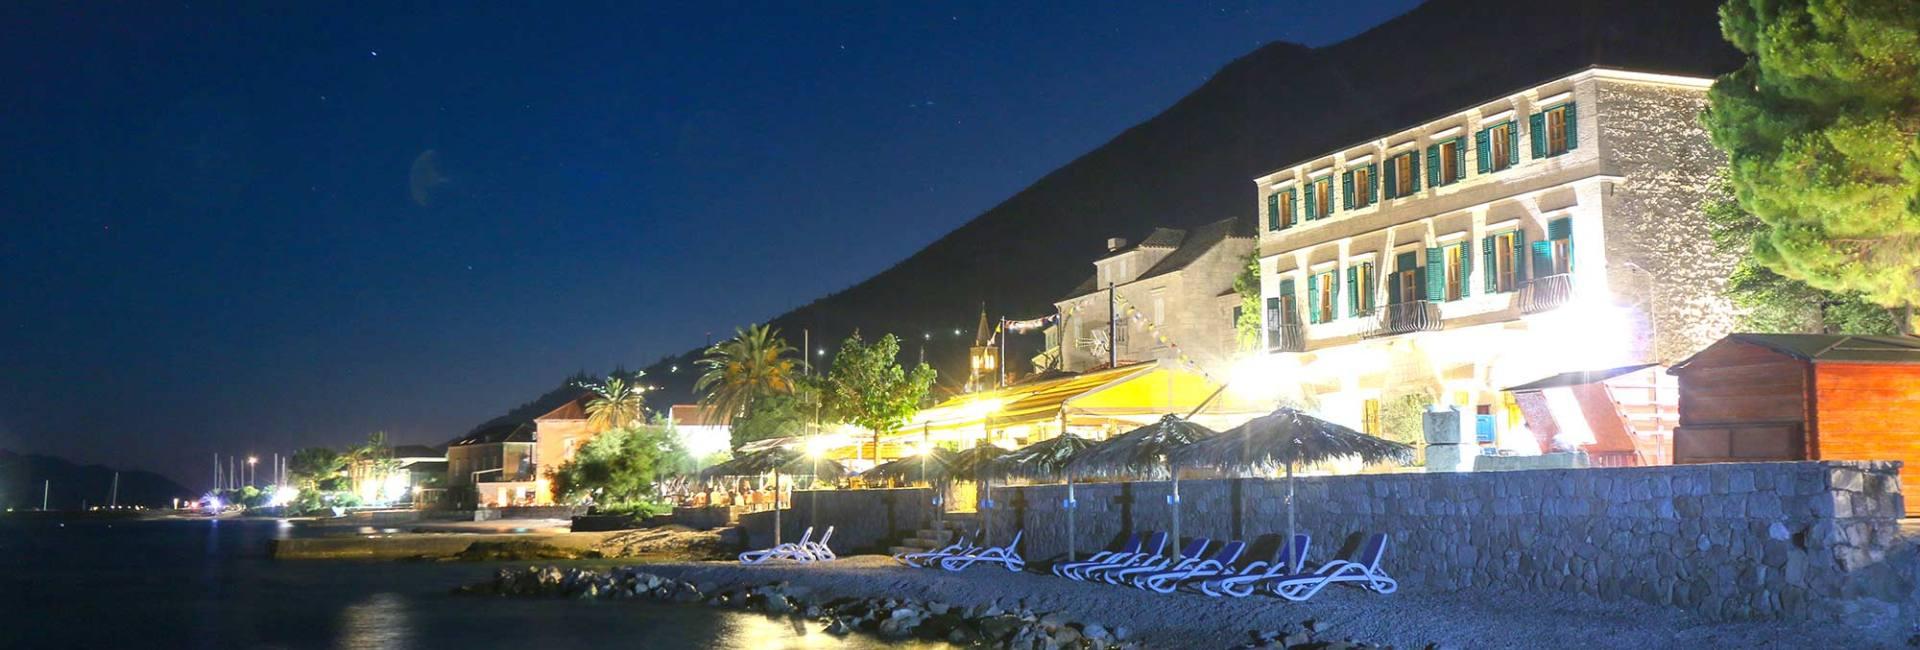 Boutique Hotel Adriatic by night